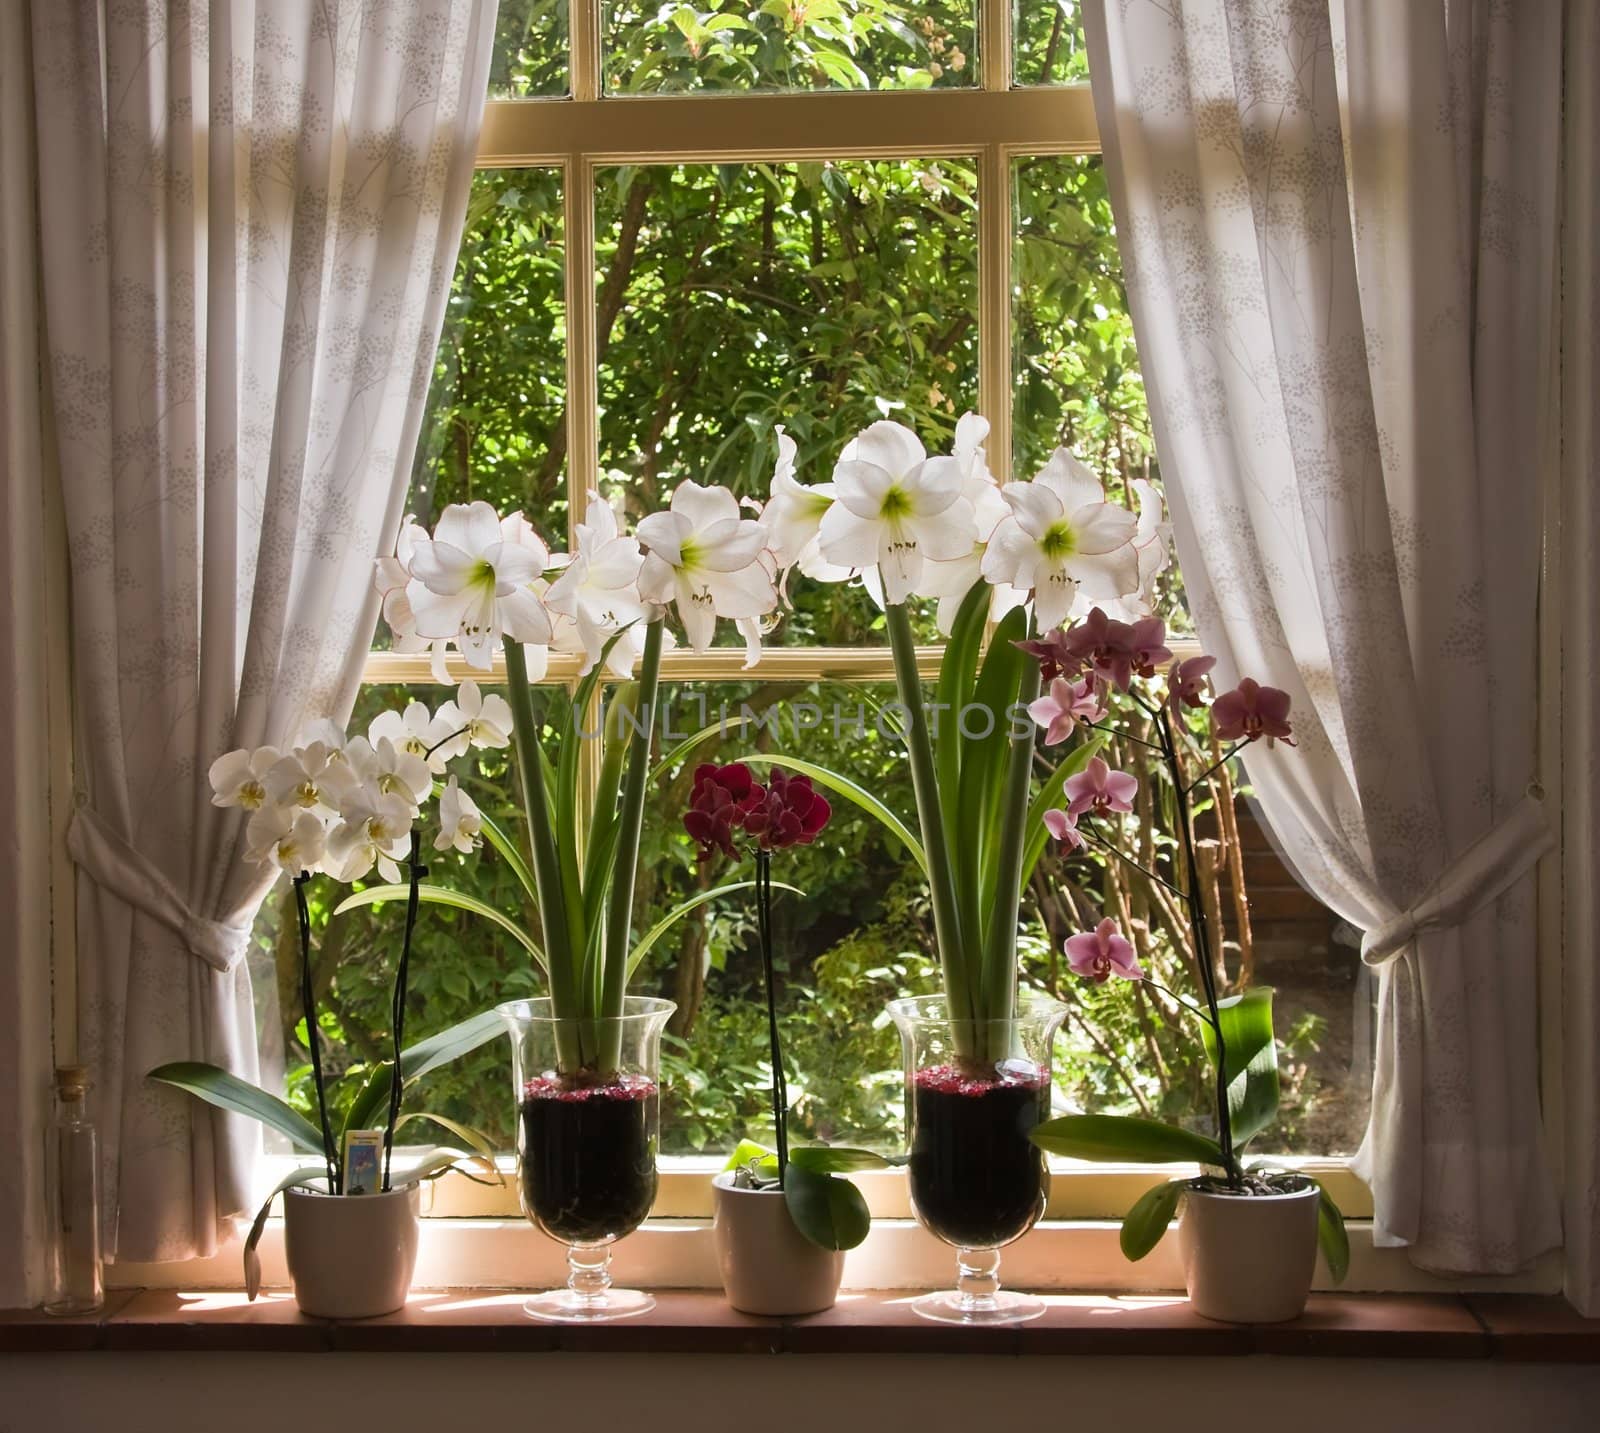 Orchids and amaryllis flowers in old window on sunny morning